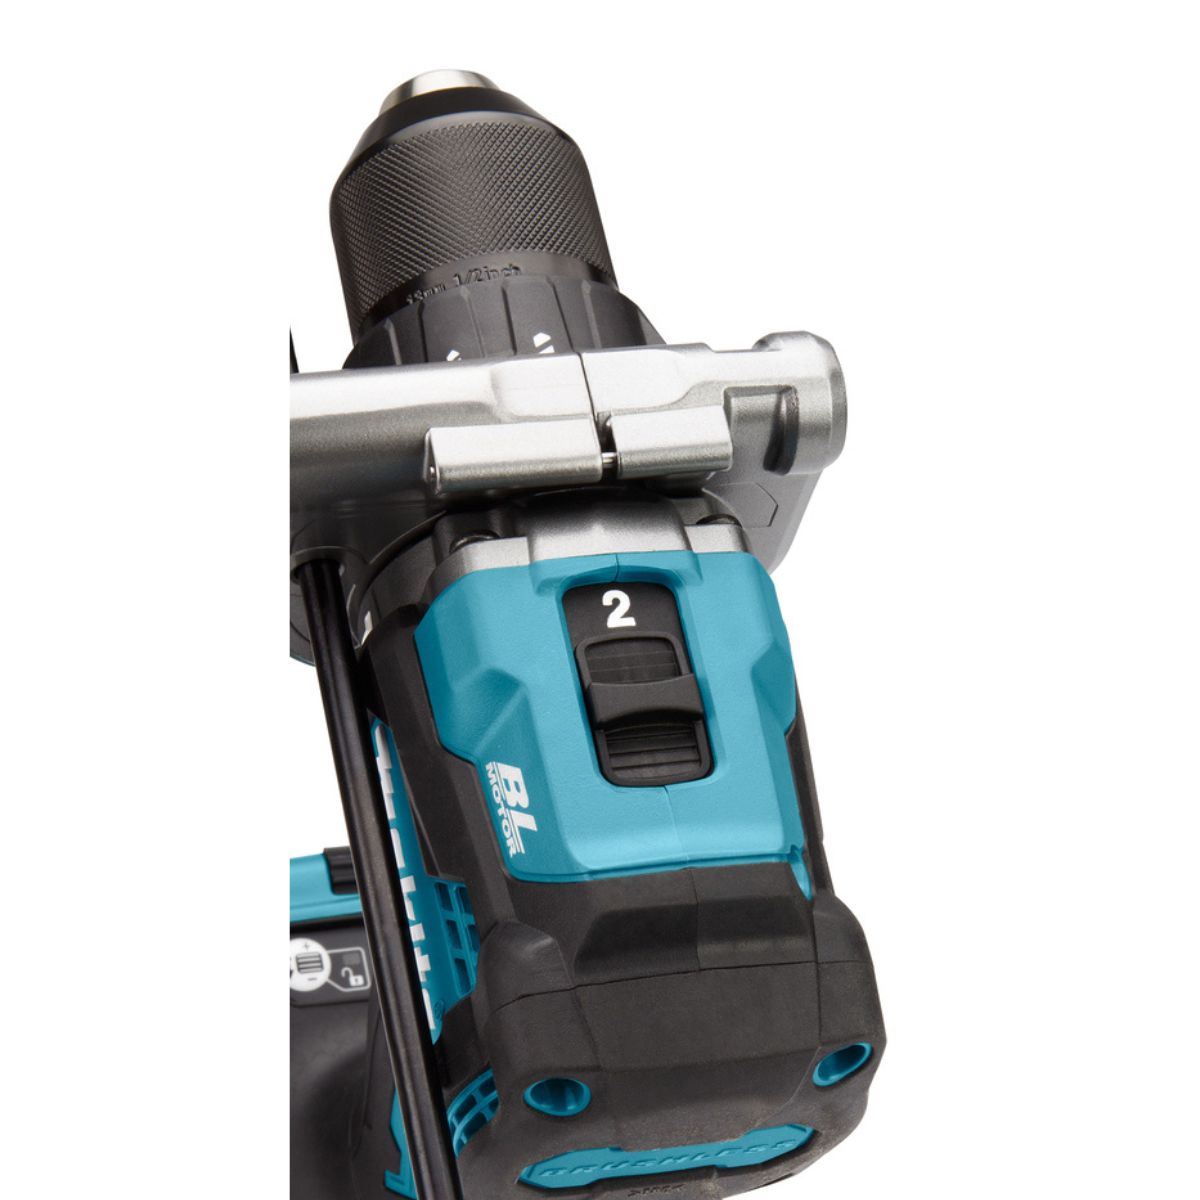 Makita HP001GZ01 40v max XGT Brushless Combi Drill Body Only with Case